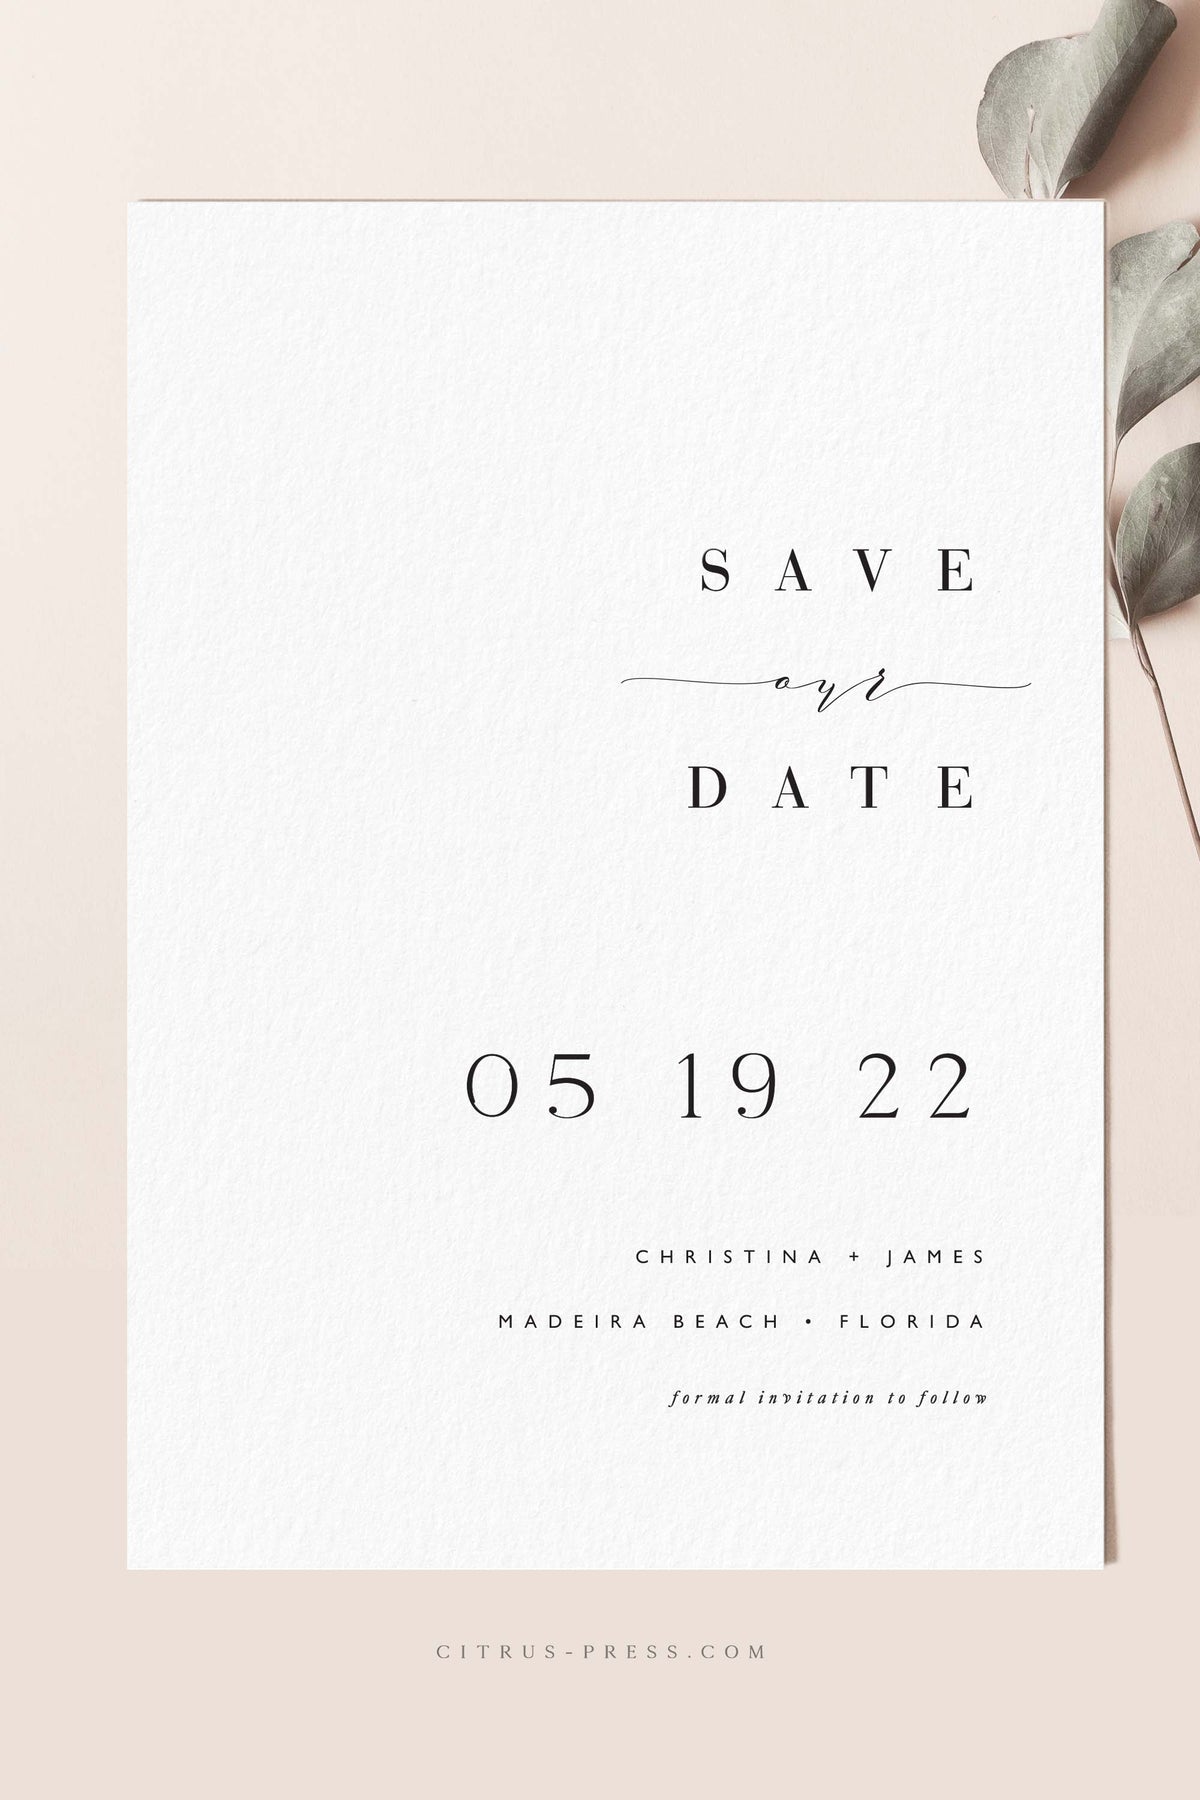 Photo Save the Date Cards/minimalist Save the Date Card Invitation/double  Sided Save the Date Card/modern Save the Date Announcement Photo 